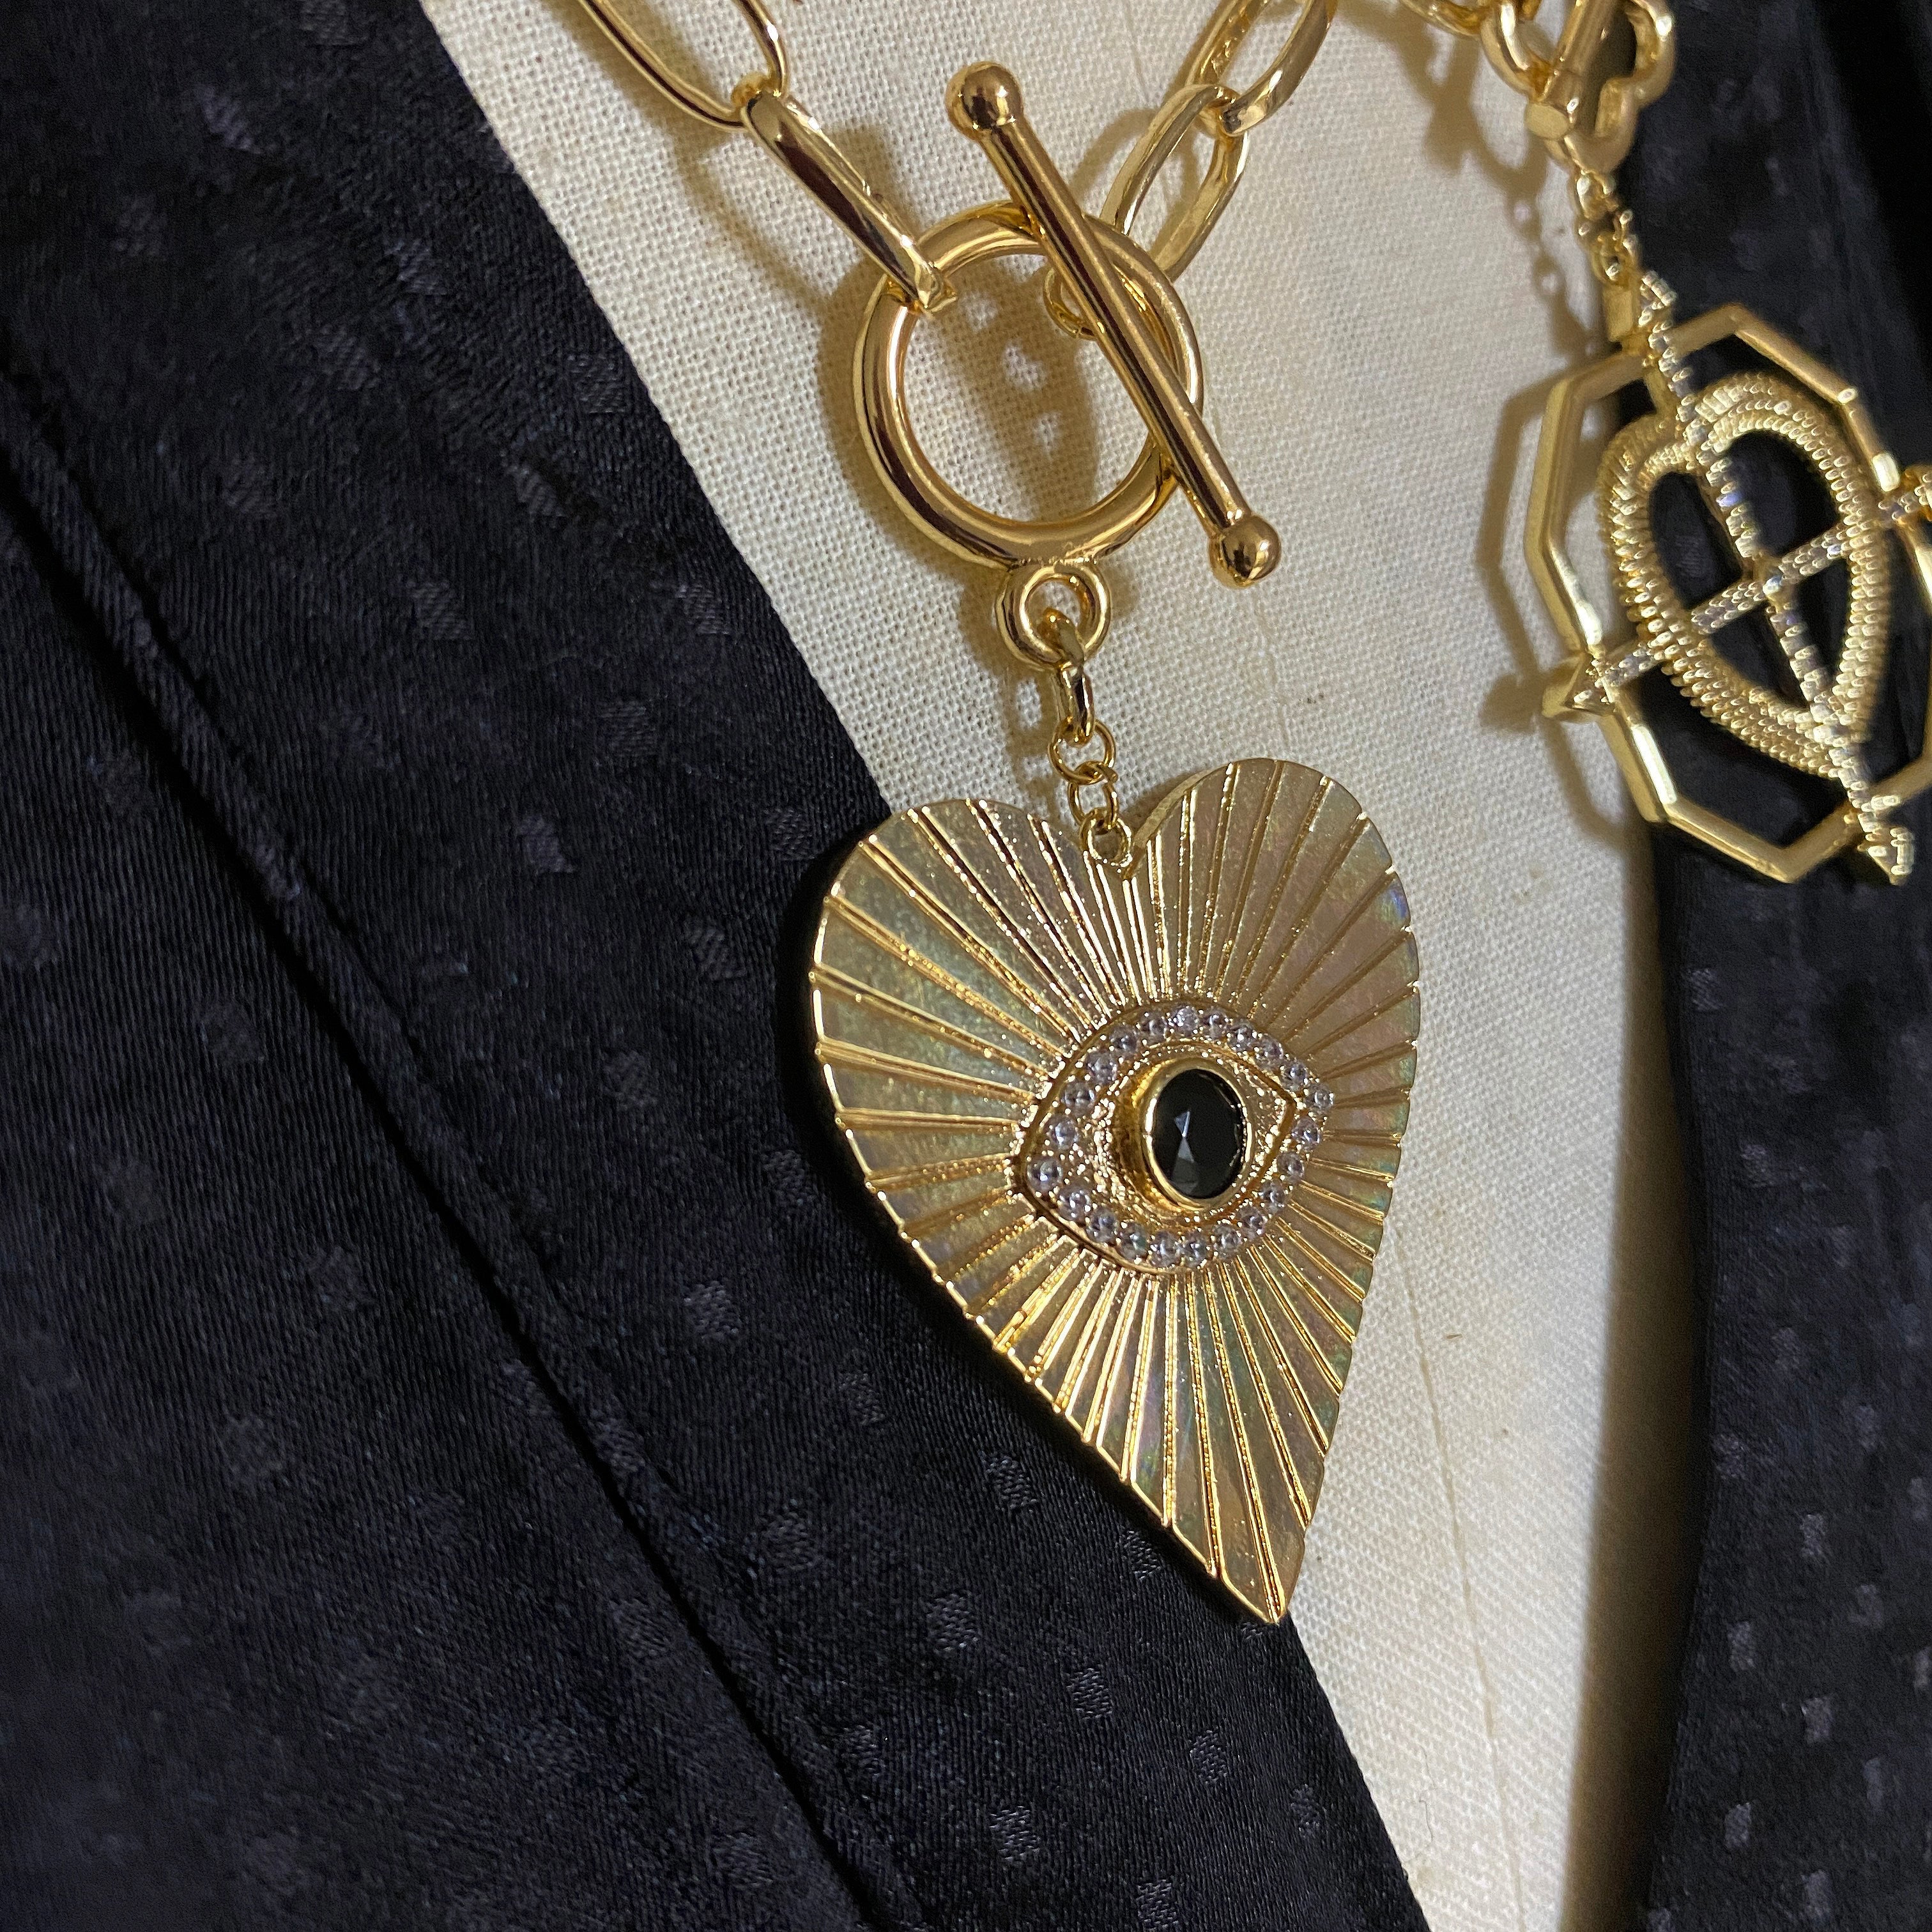 Gold amore charm and chain fob necklace